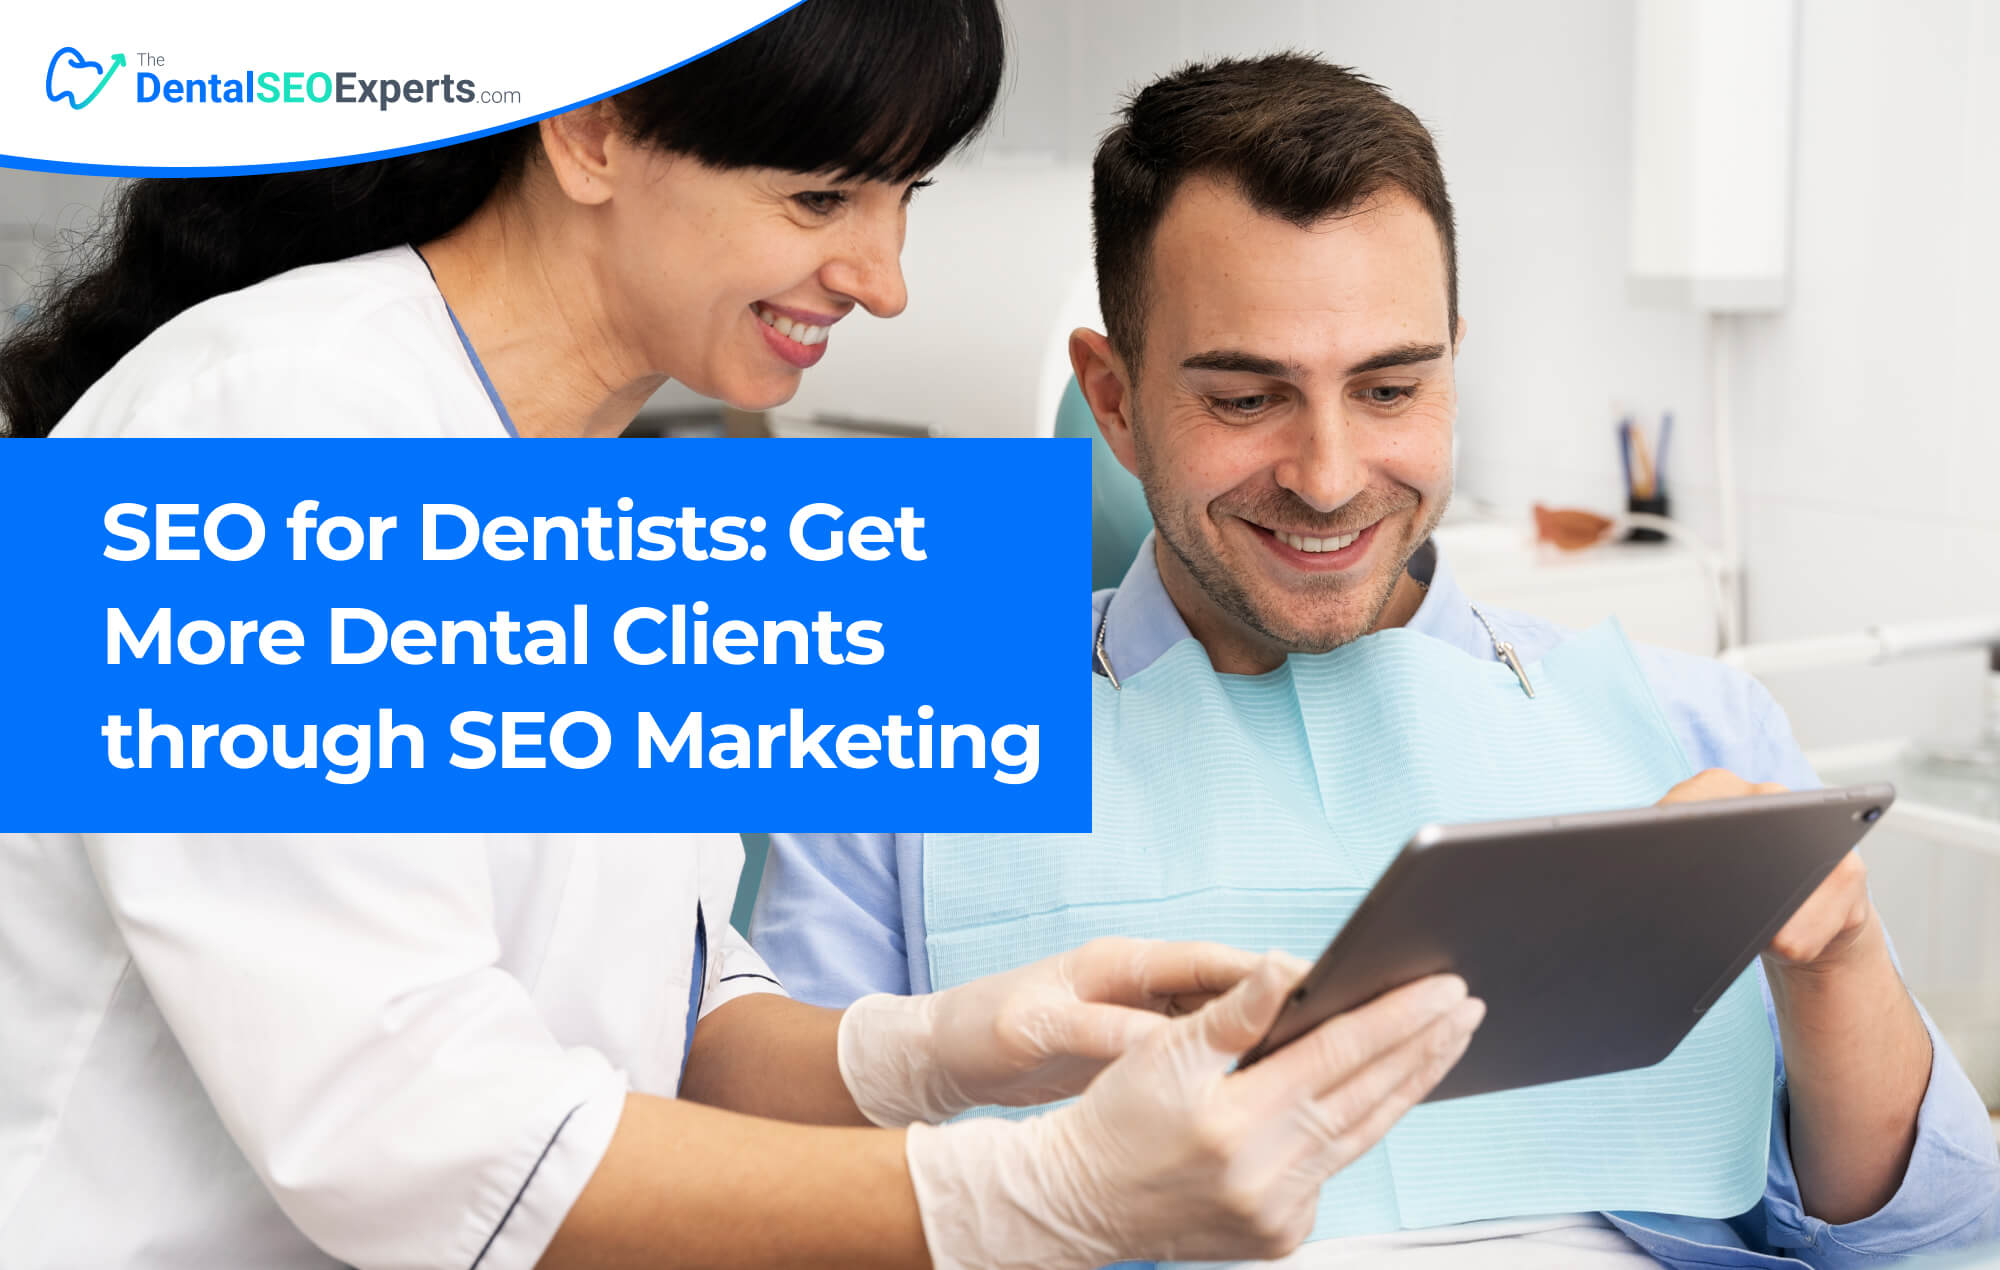 TheDentalSEOExperts - SEO for Dentists Get More Dental Clients through SEO Marketing